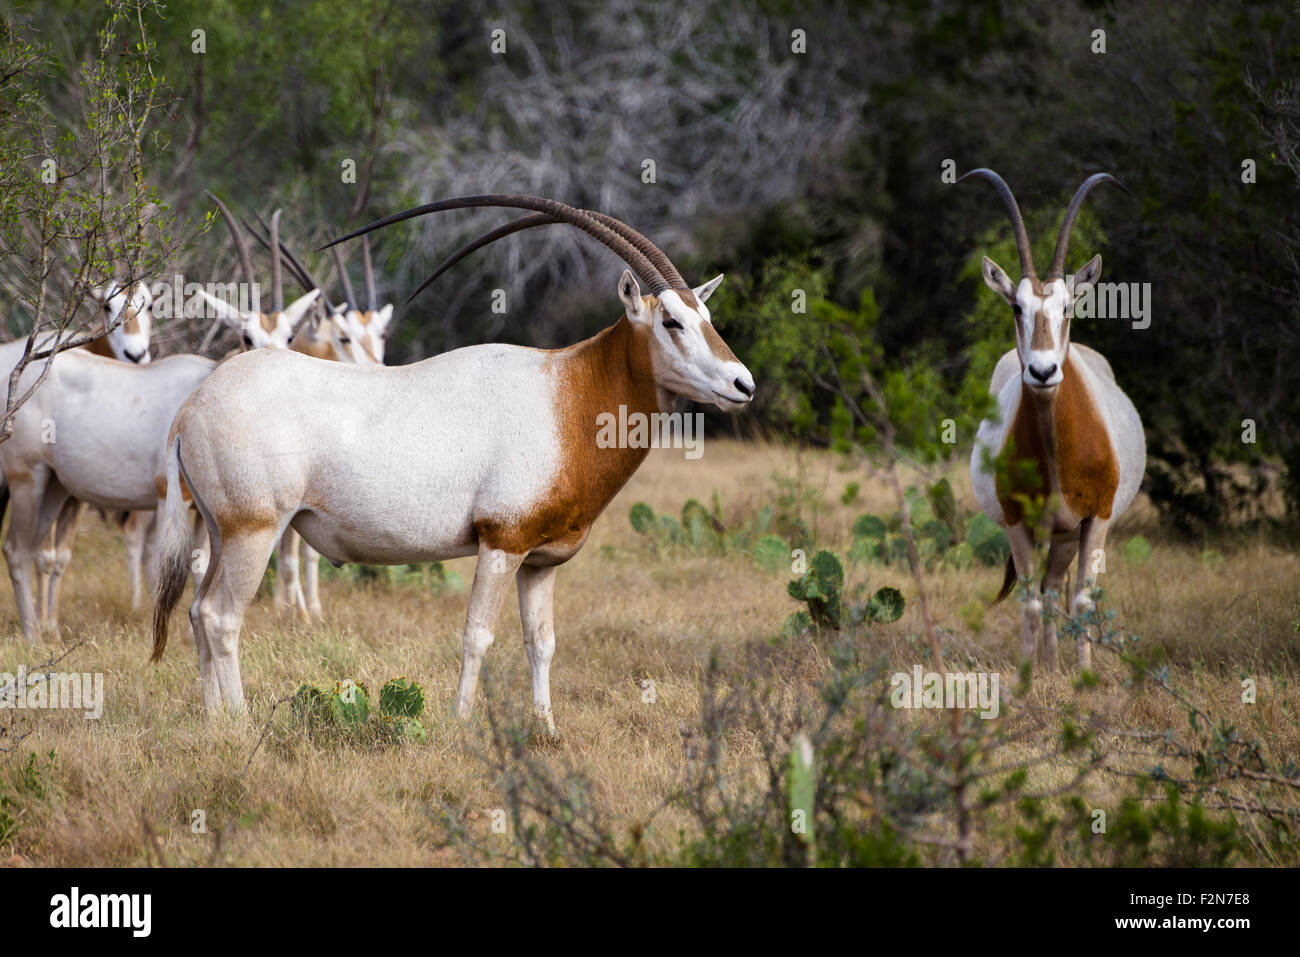 Wild Scimitar Horned Oryx Bull and Cow Standing. These animals are extinct in their native lands of Africa. Stock Photo